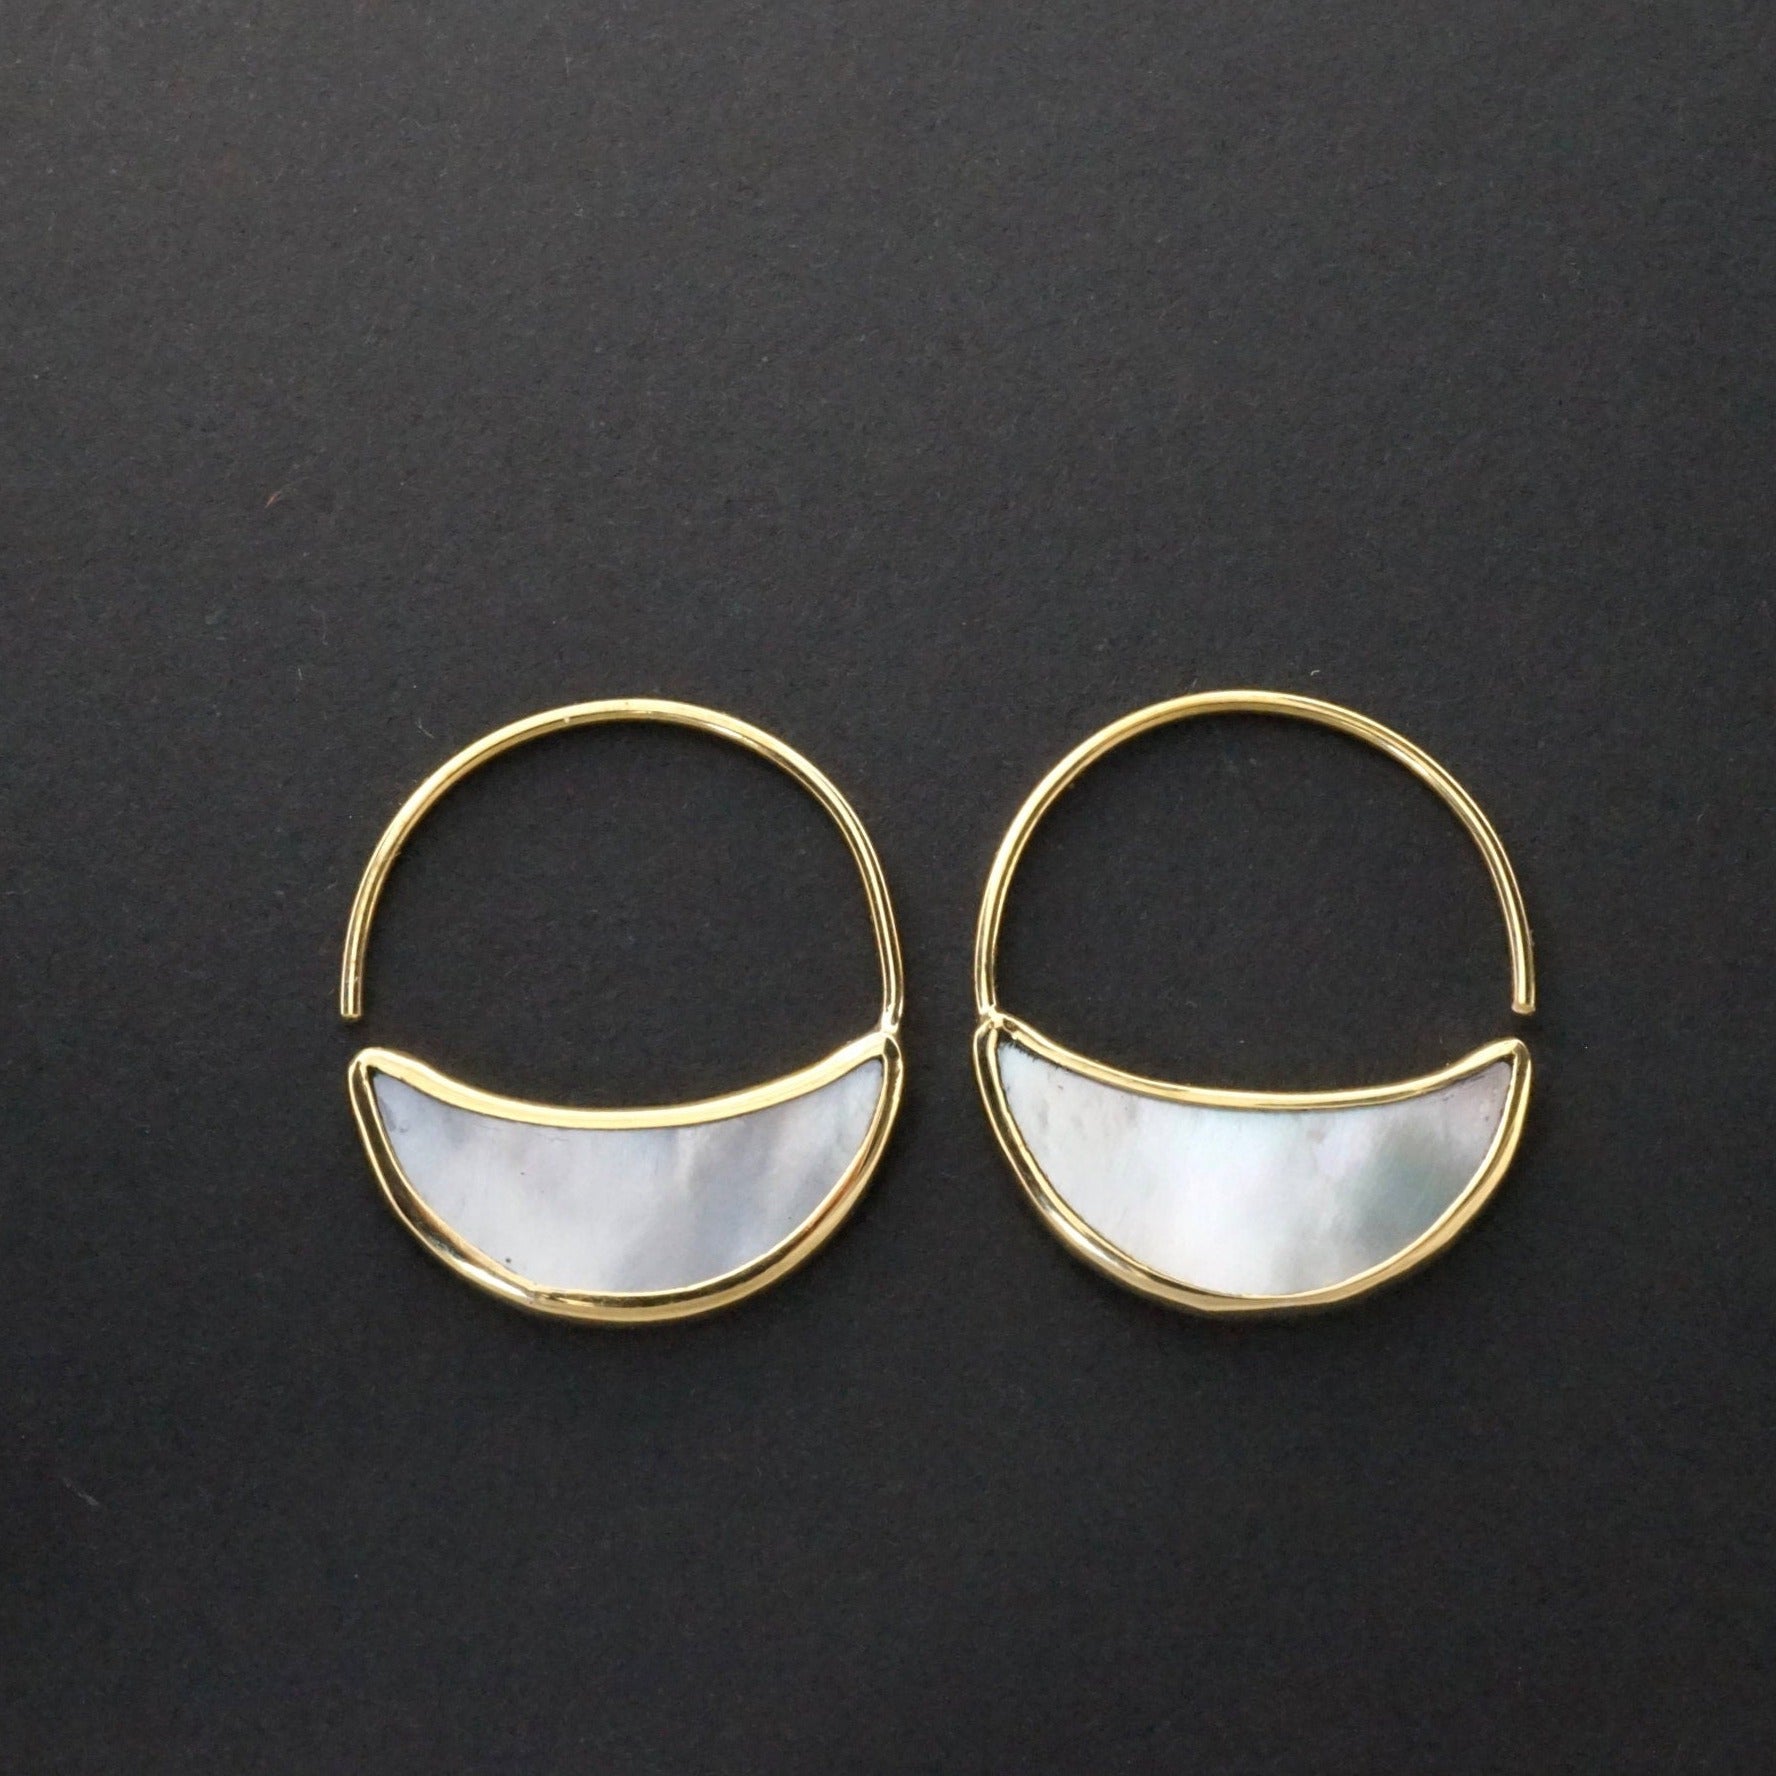 Small Crescent Moon Earrings - Mother Of Pearl Hoops - Eclipse Statement earrings - (248B)